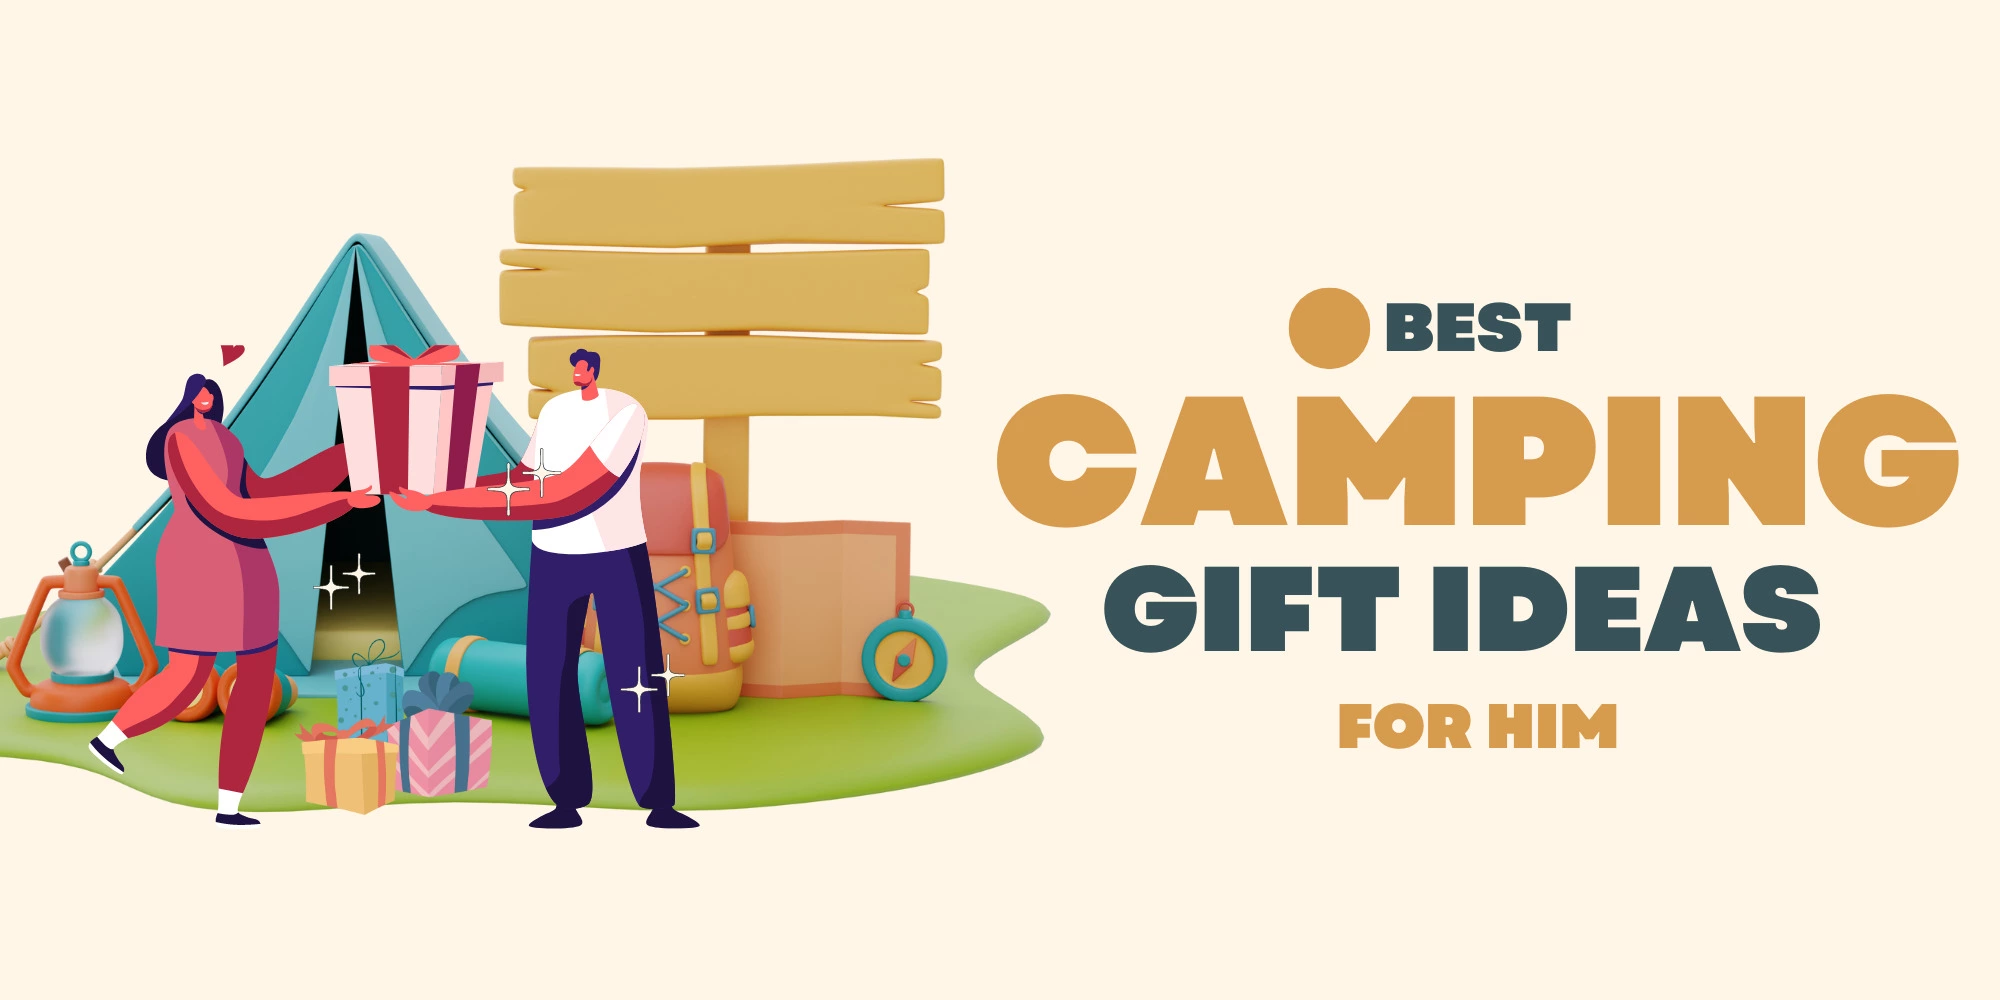 Best Camping Gift Ideas for Him